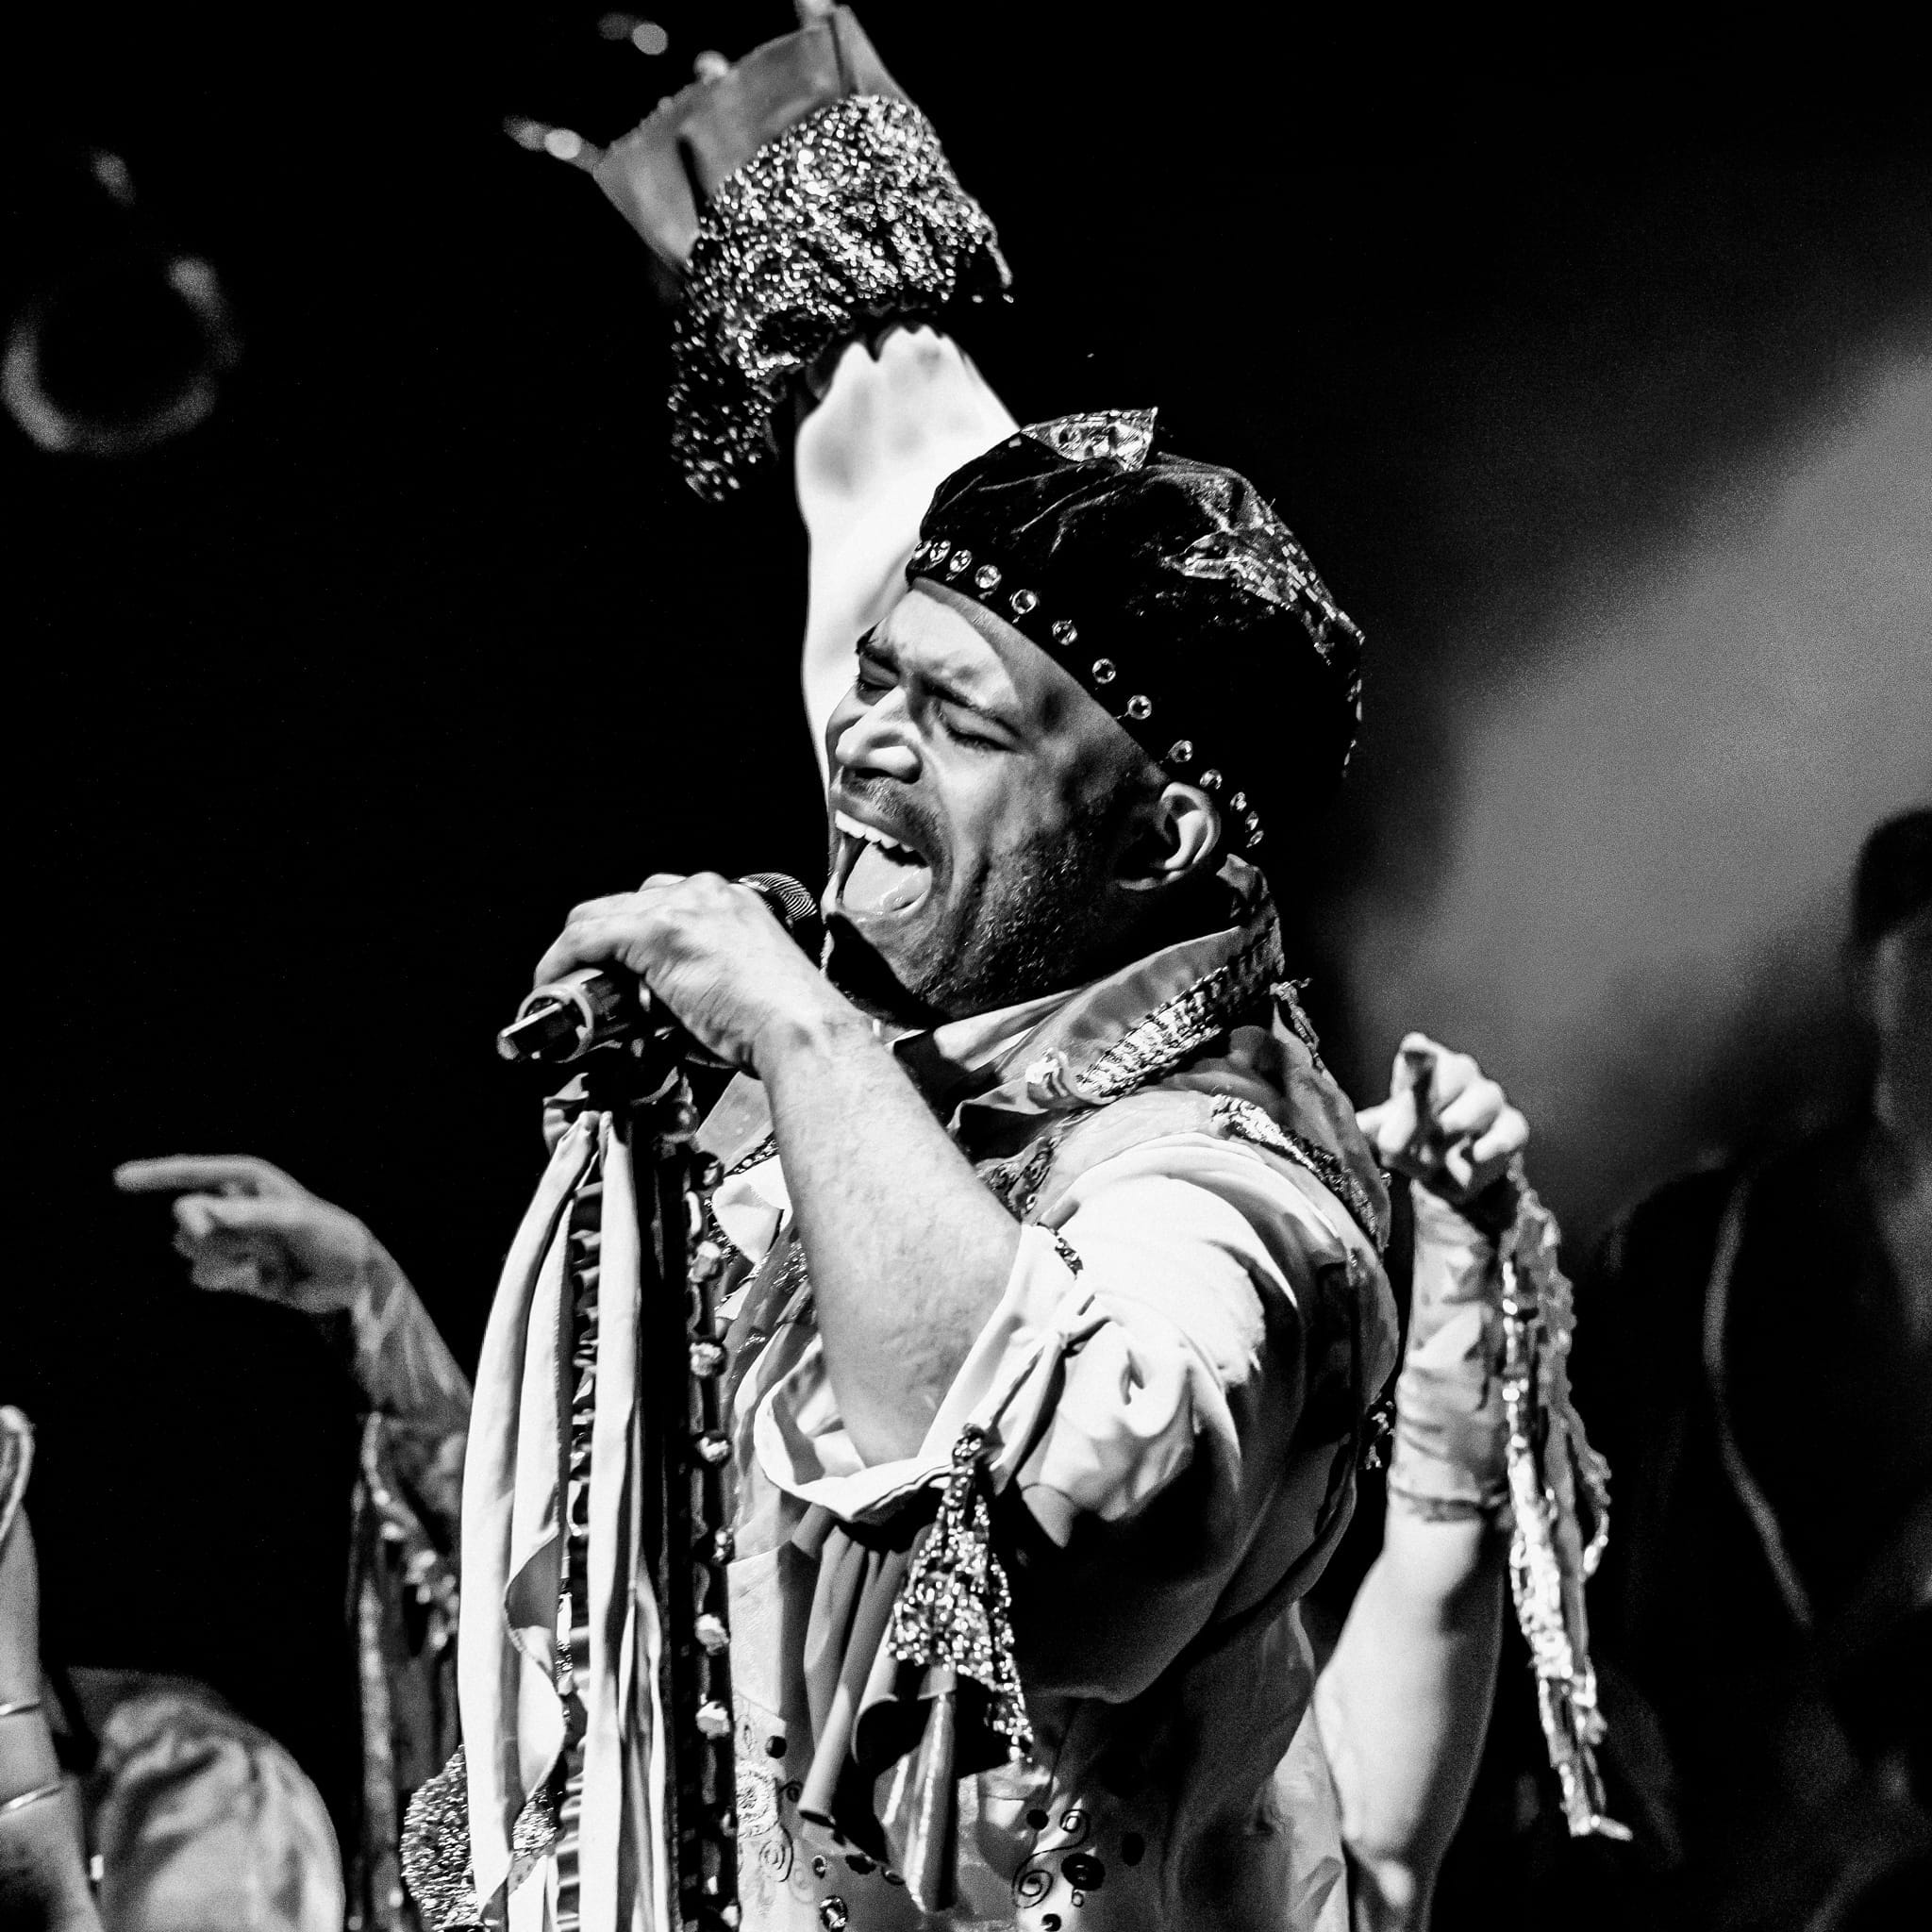 A black and white photo of a man in a dreamy costume singing.